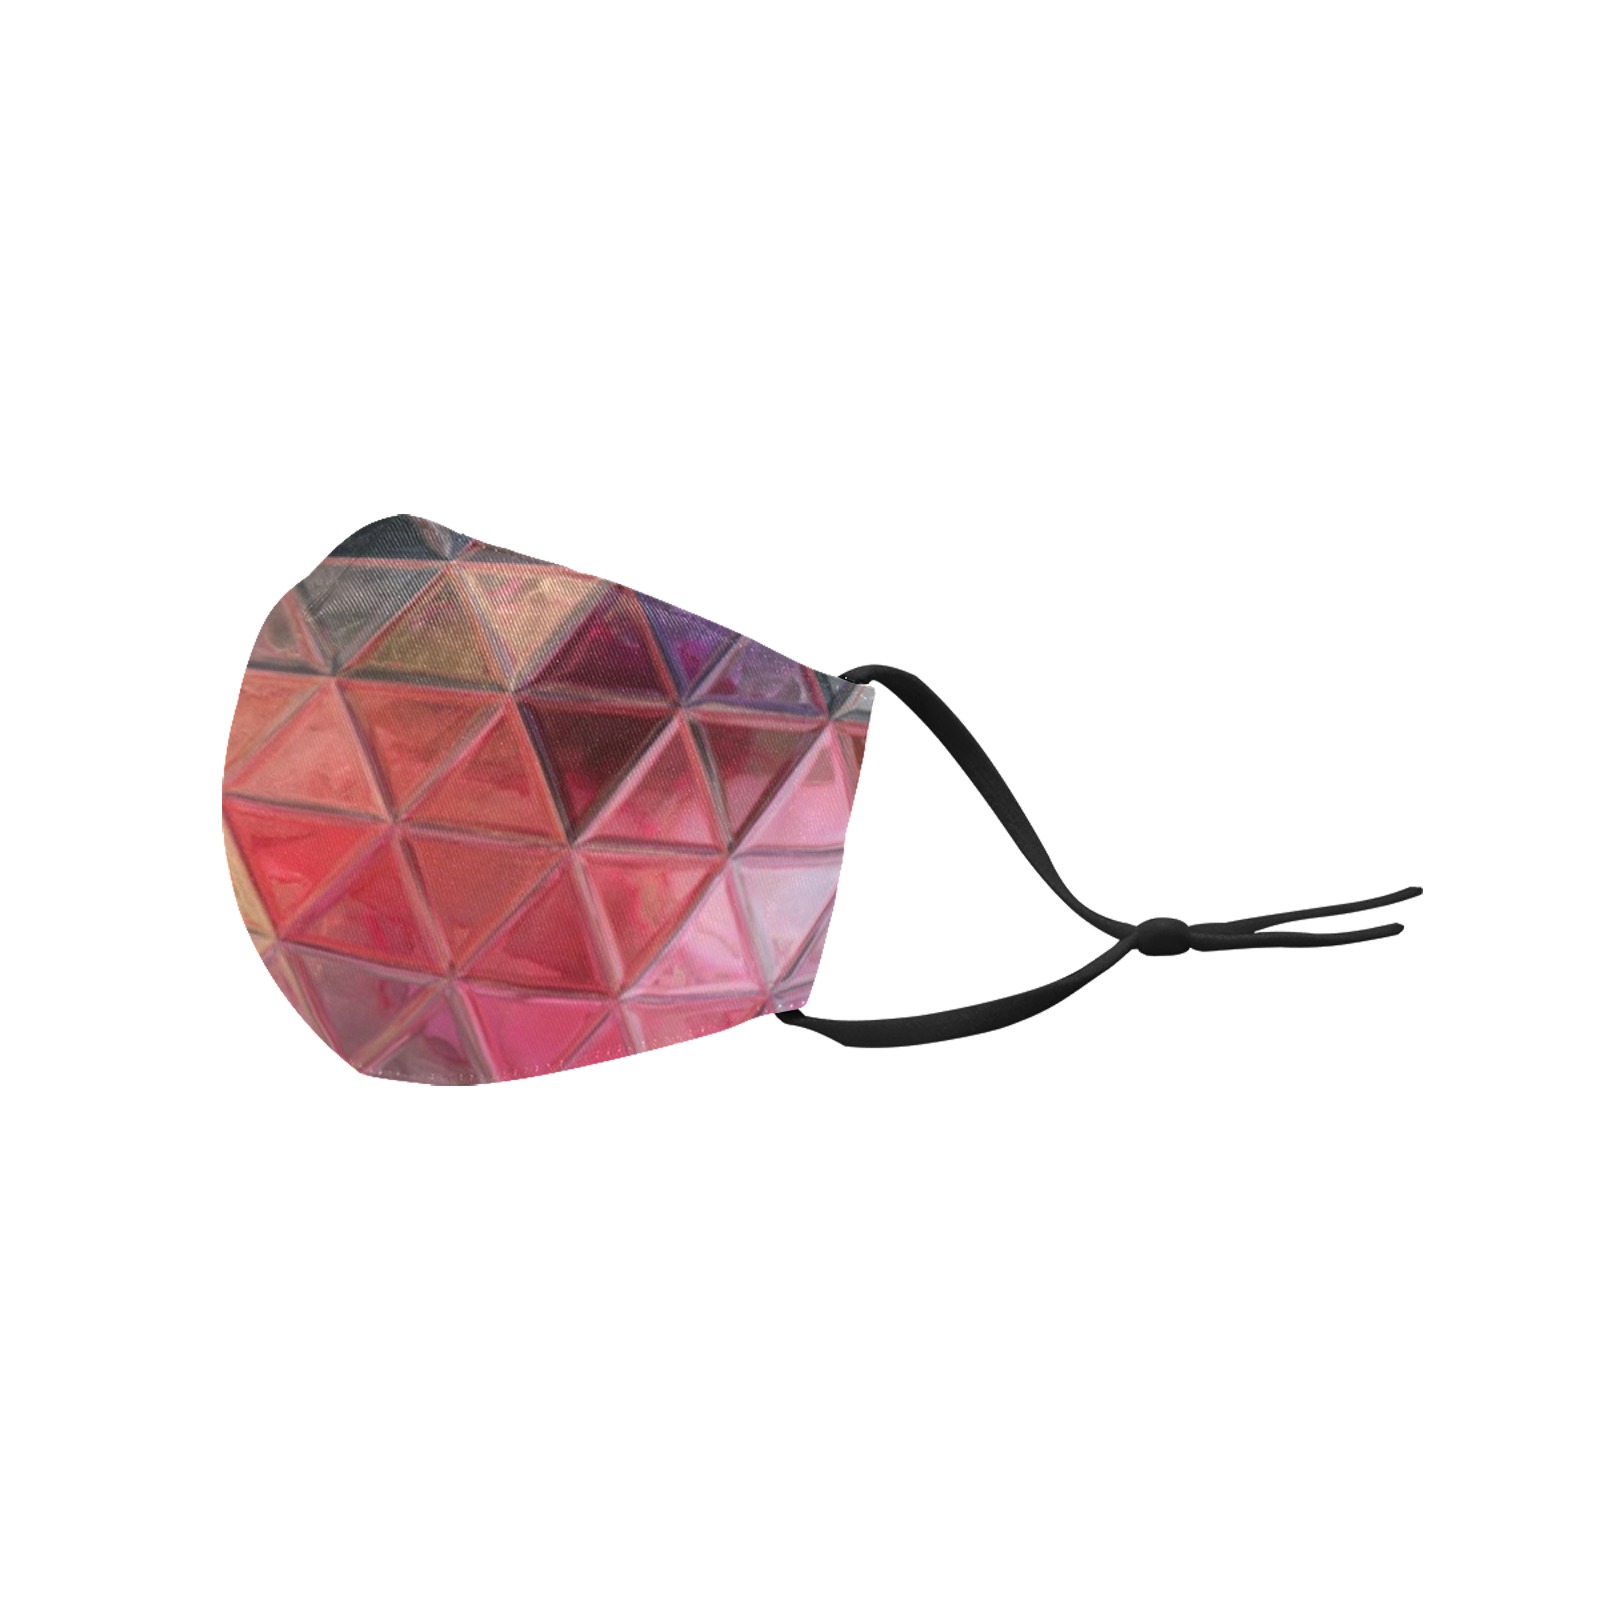 mosaic triangle 3 3D Mouth Mask with Drawstring (Pack of 100) (Model M04)